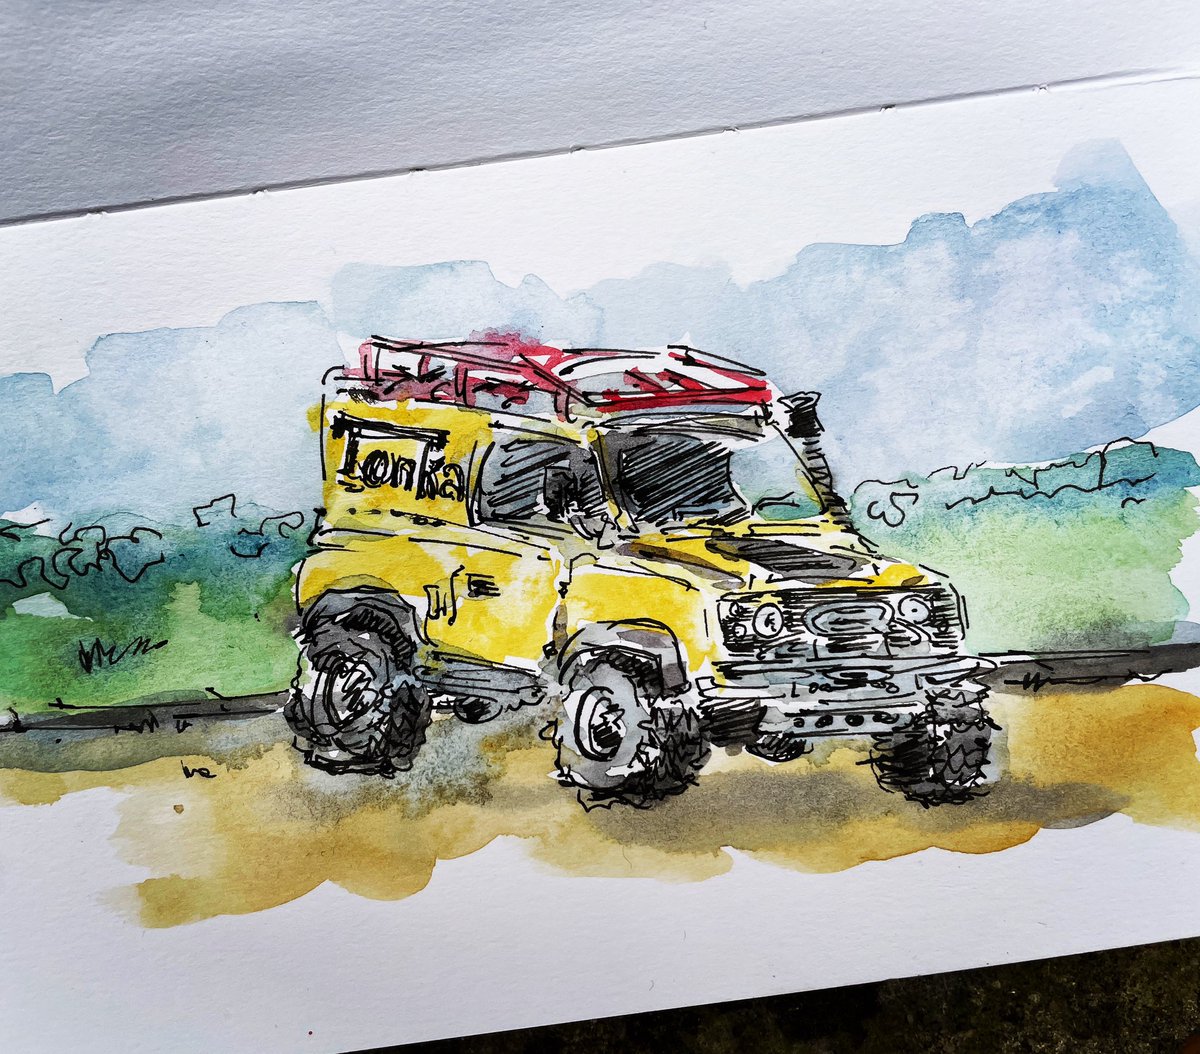 When you see a car that immediately transports you to your childhood…

#tonka #tonkatoys #landrover #landroverlife #art #illustration #watercolour #sketch #sketchbook #ajoto